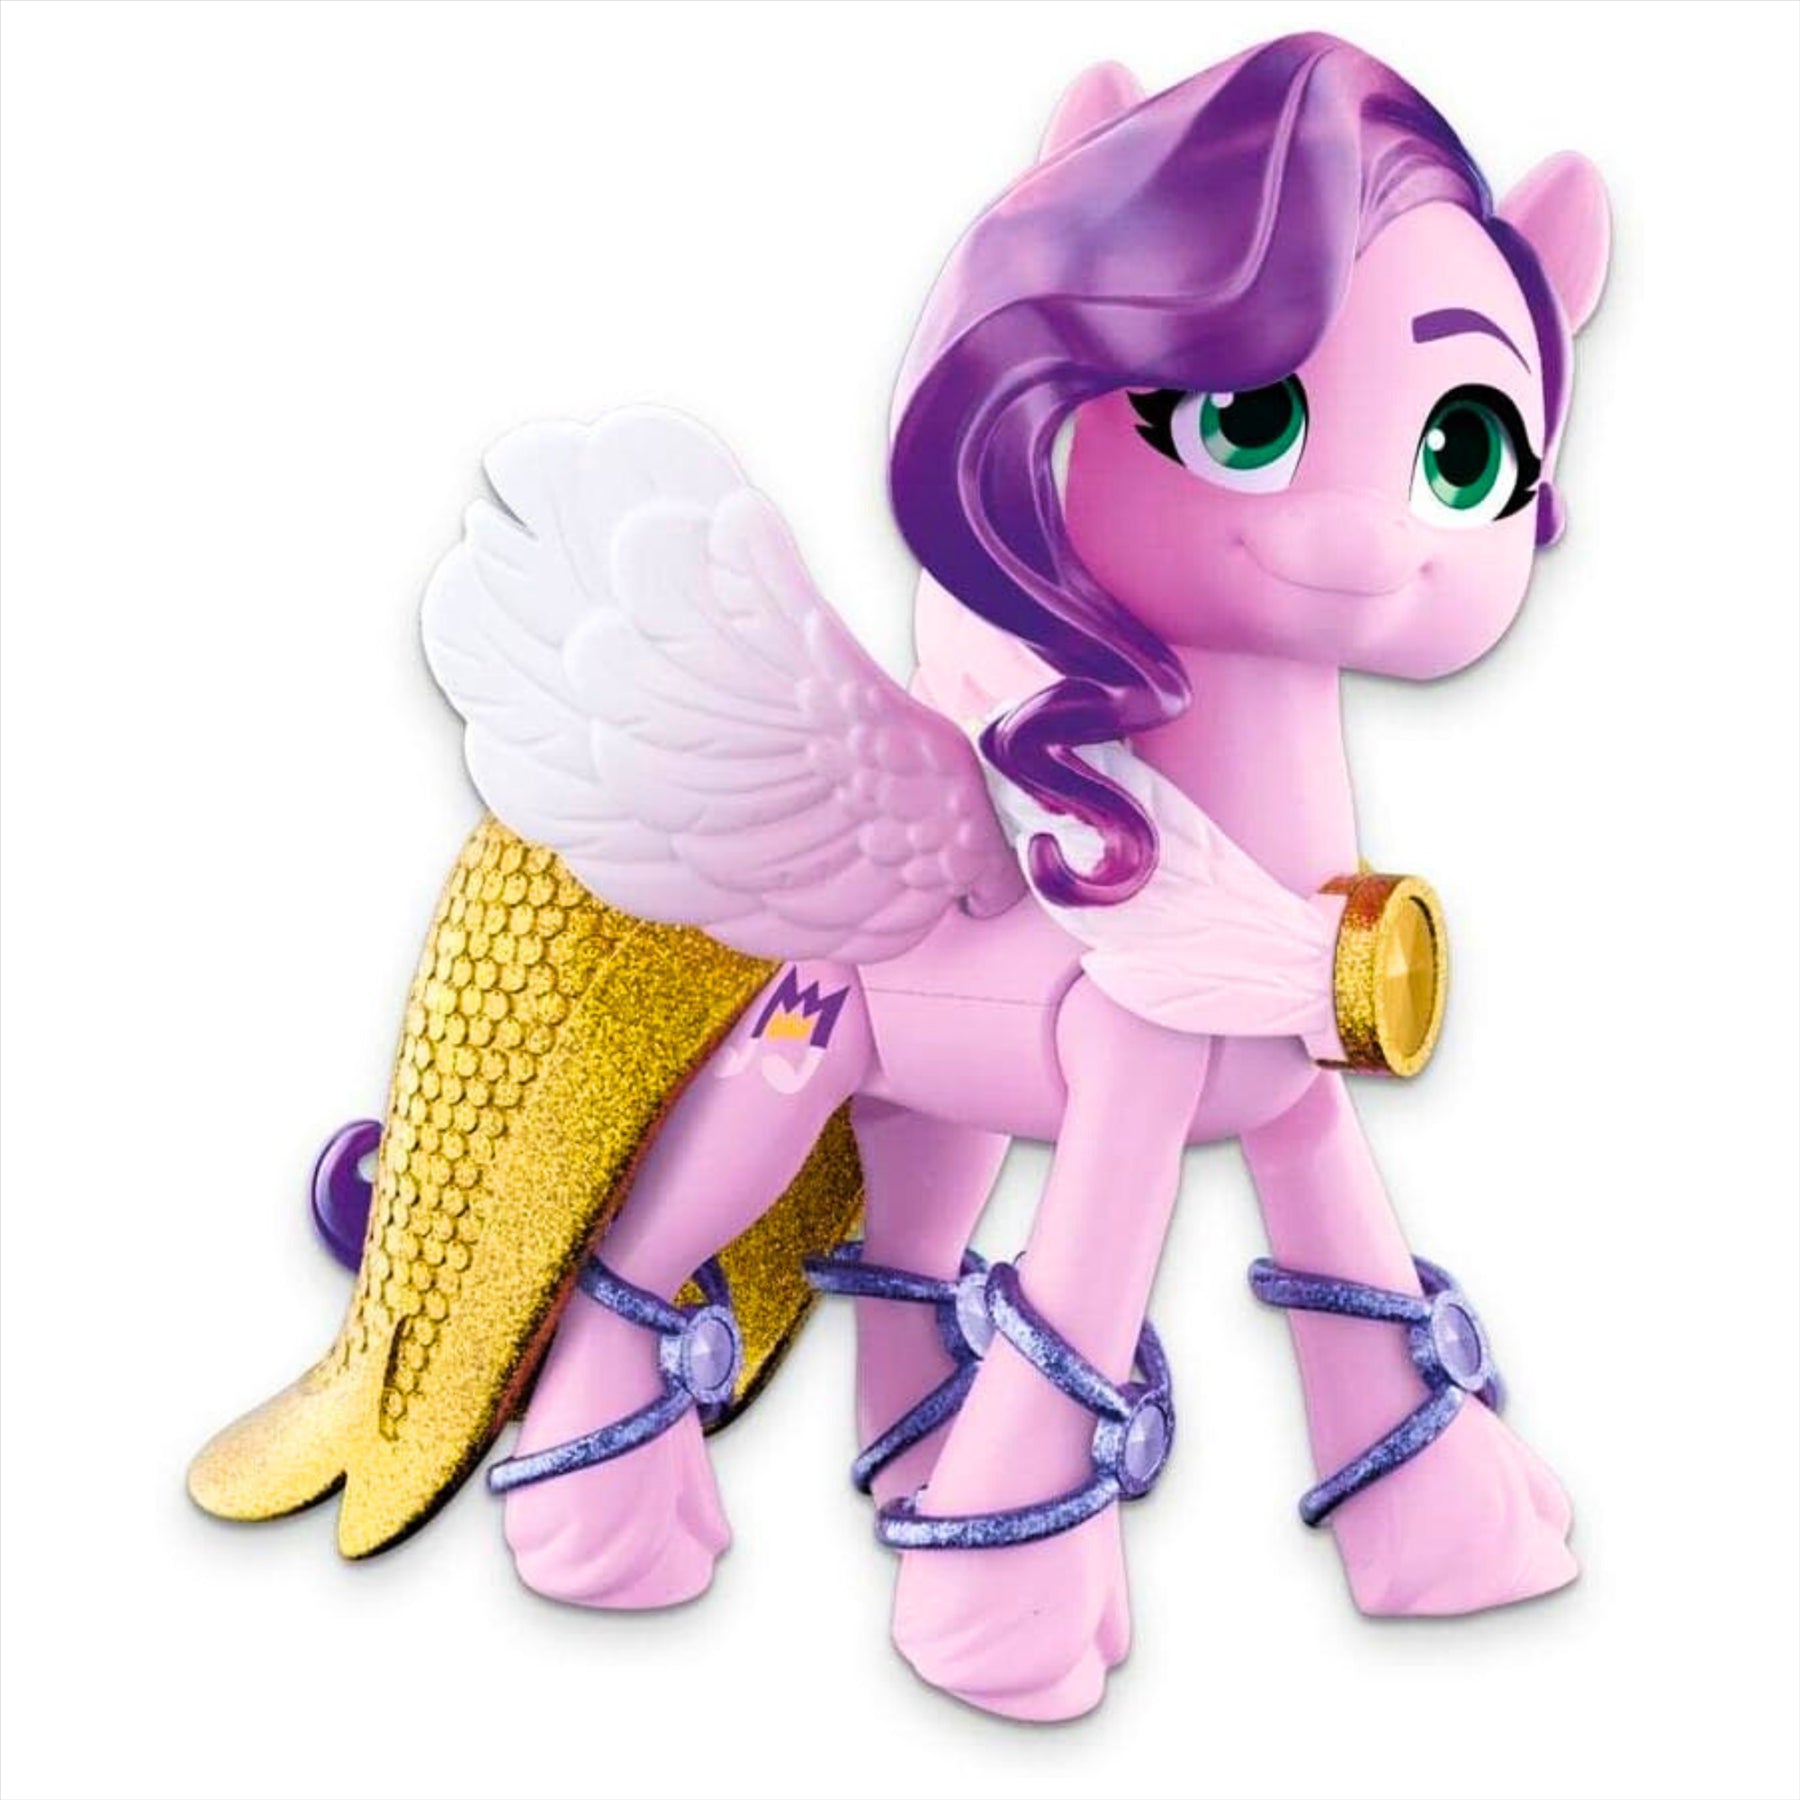 My Little Pony Crystal Adventure Princess Petals 7.5cm Play Figure Toy with Accessories and Friendship Bracelet